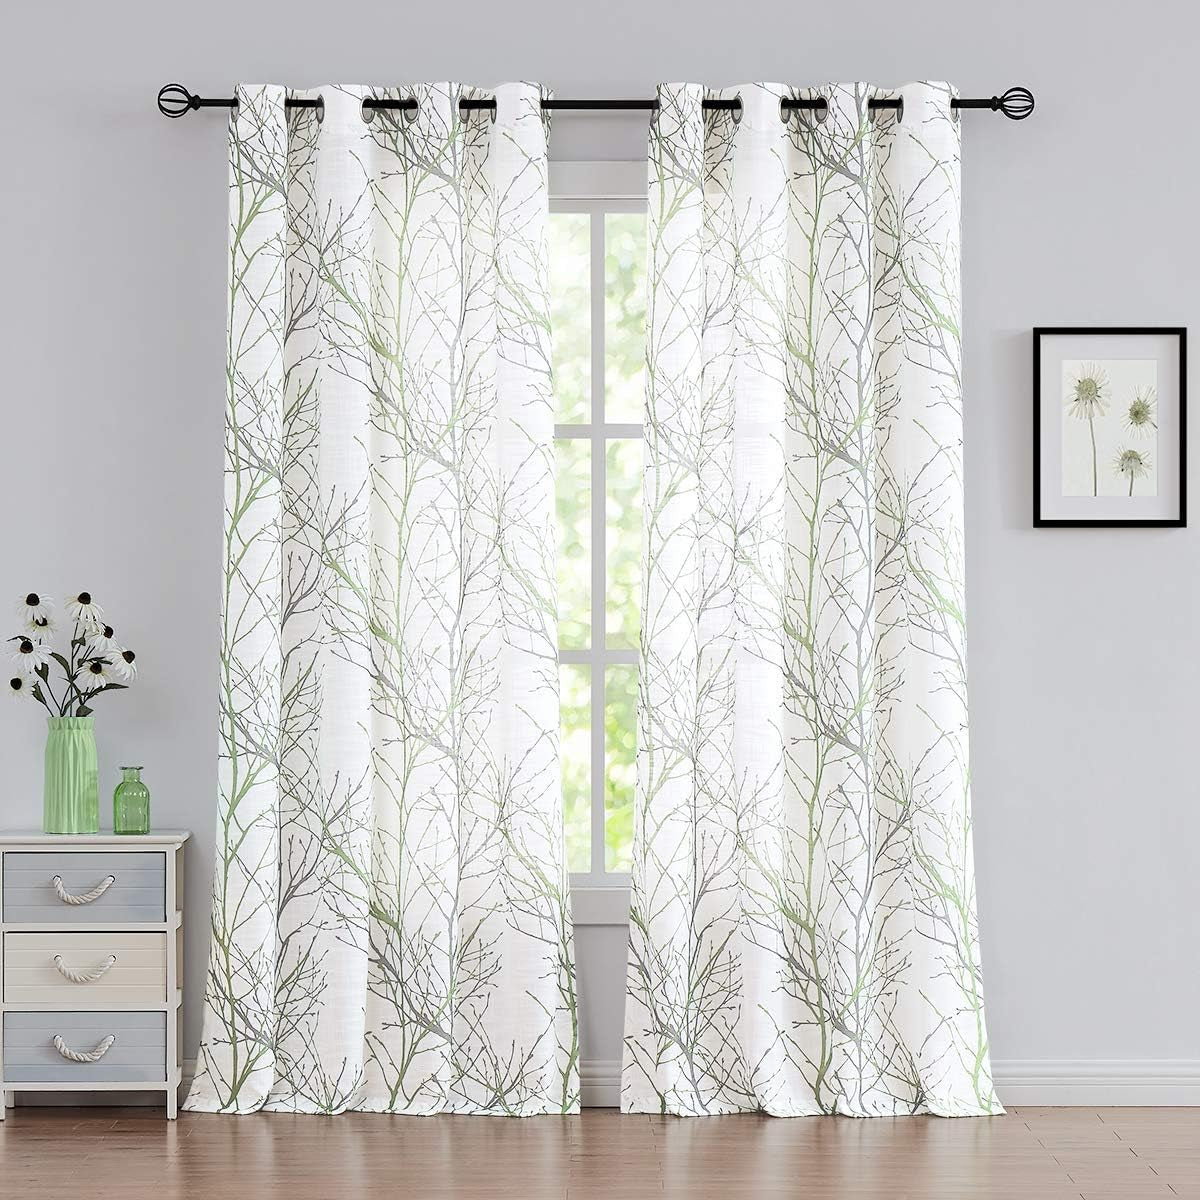 FMFUNCTEX Blue White Curtains for Kitchen Living Room 72“ Grey Tree Branches Print Curtain Set for Small Windows Linen Textured Semi-Sheer Drapes for Bedroom Grommet Top, 2 Panels  Fmfunctex Green 50" X 96" |2Pcs 